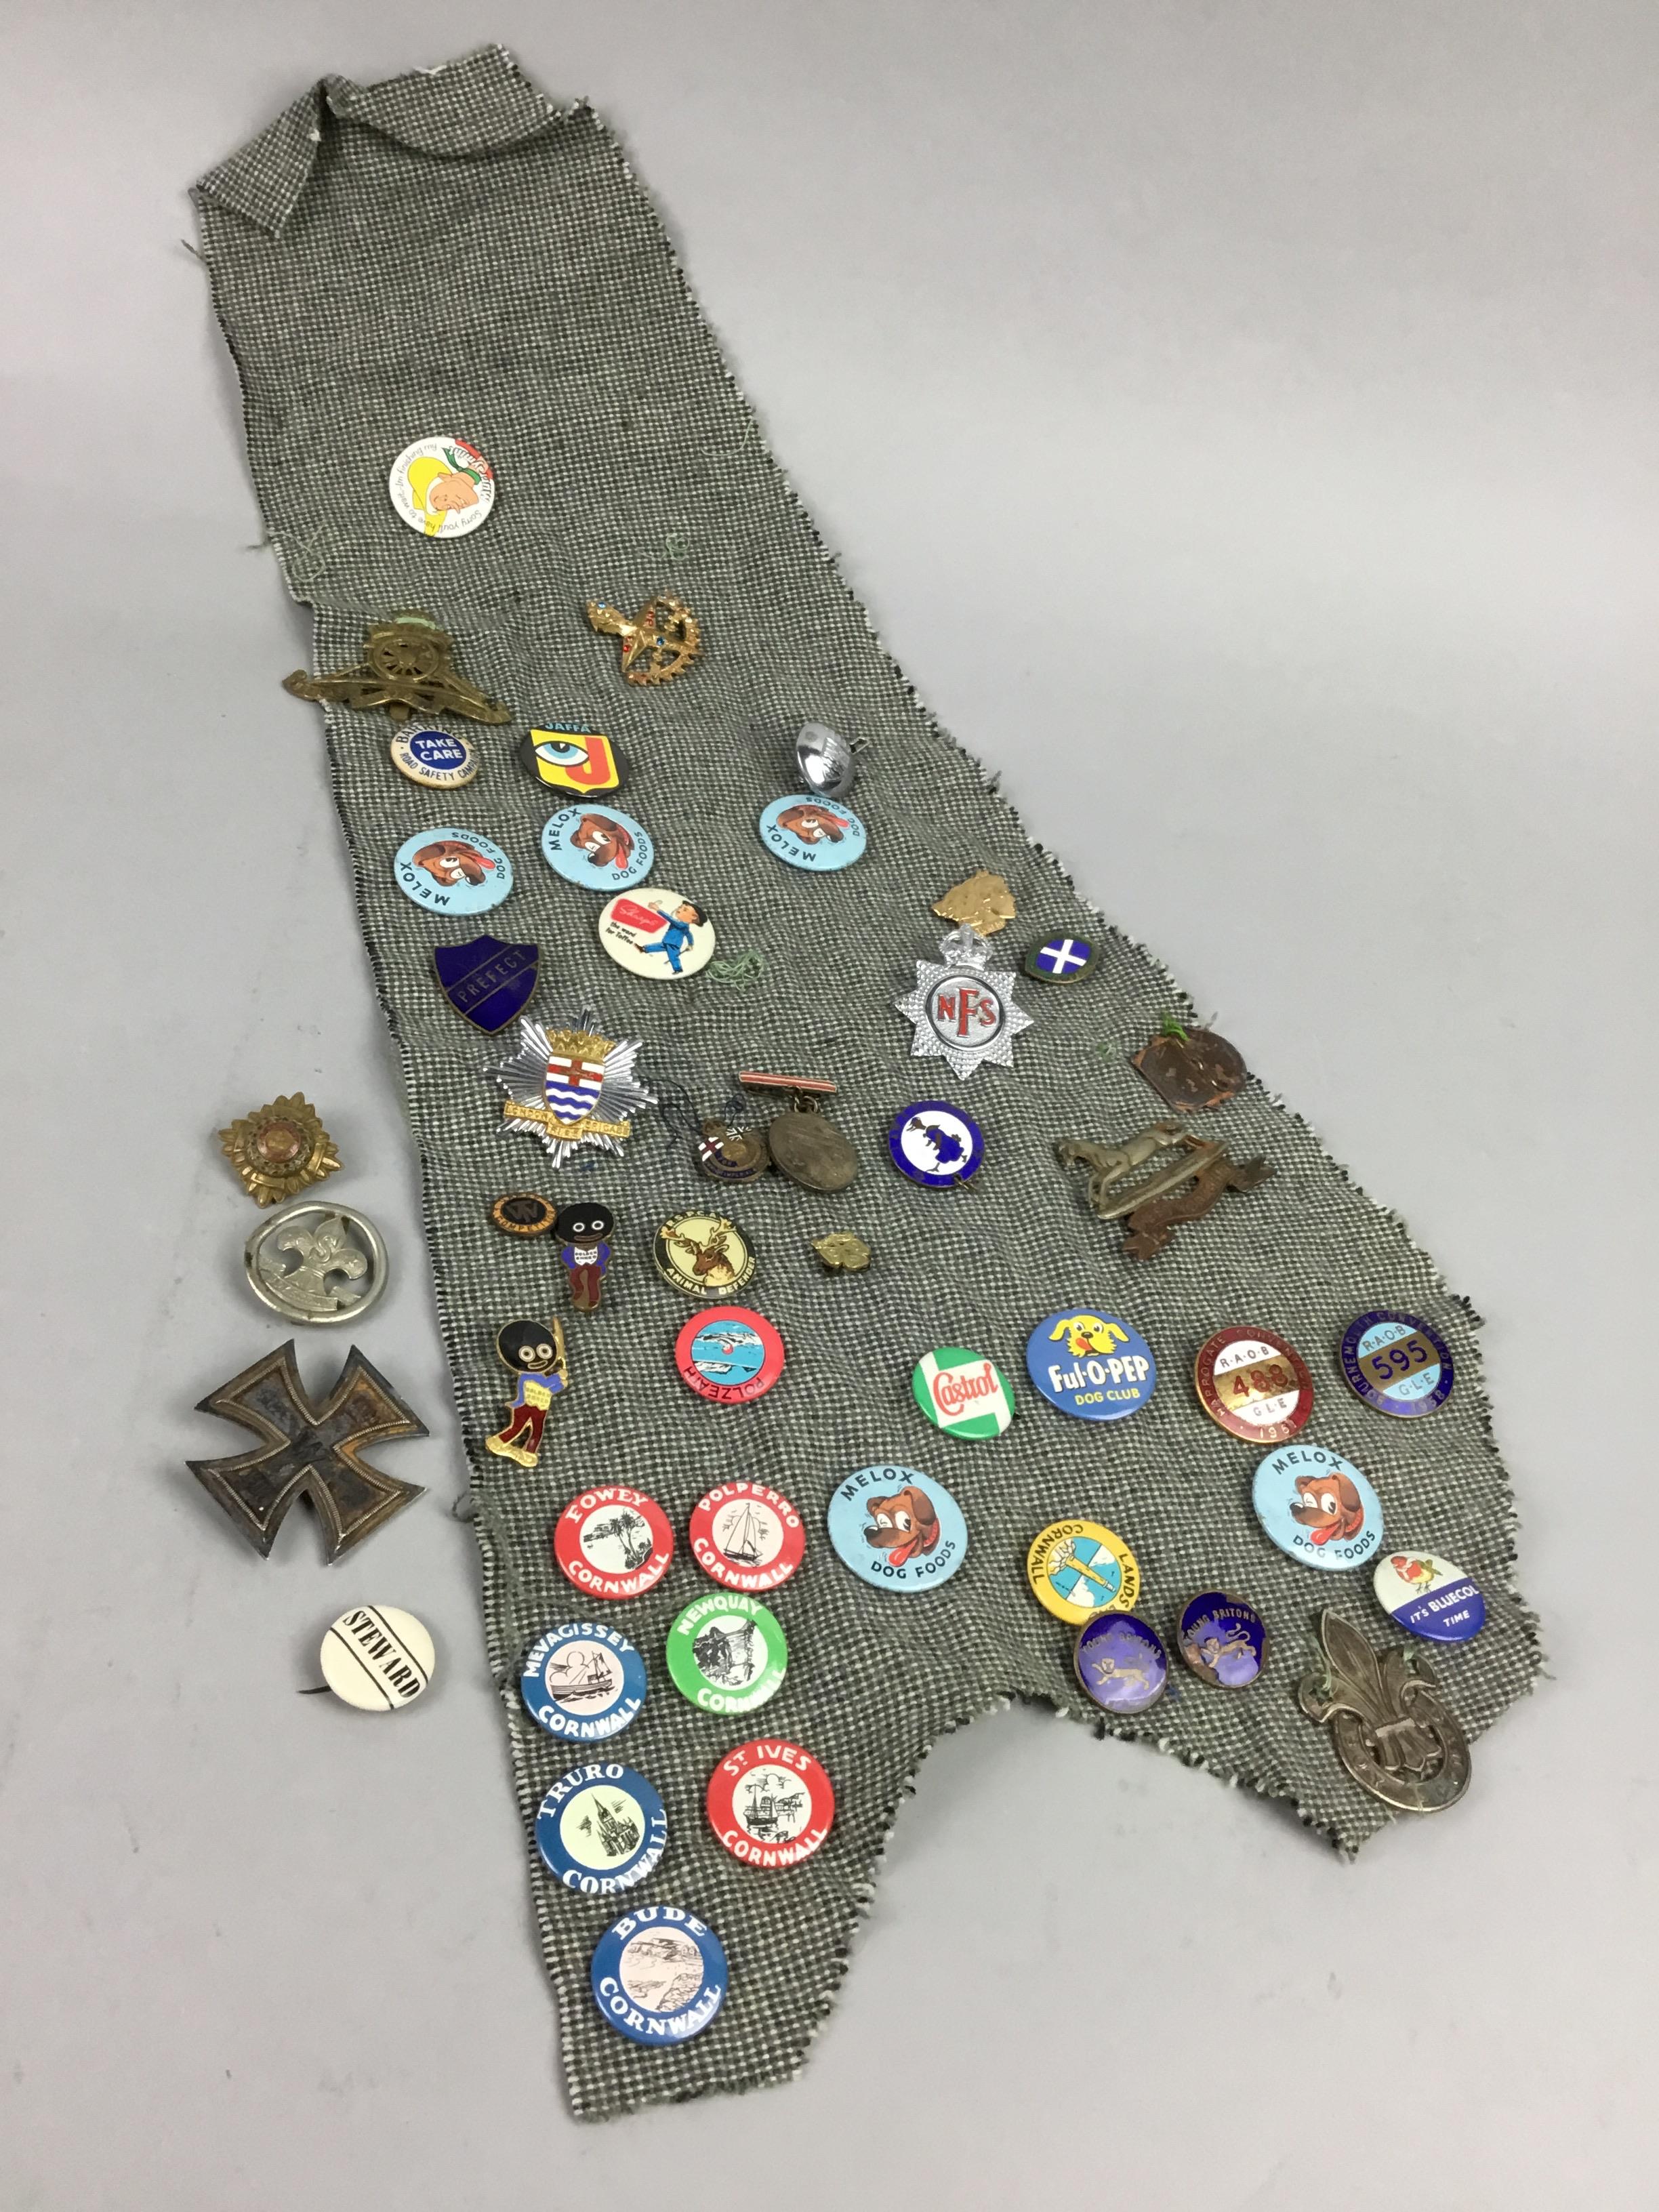 A COLLECTION OF ENAMEL BADGES, BUTTONS AND DRESS WATCHES